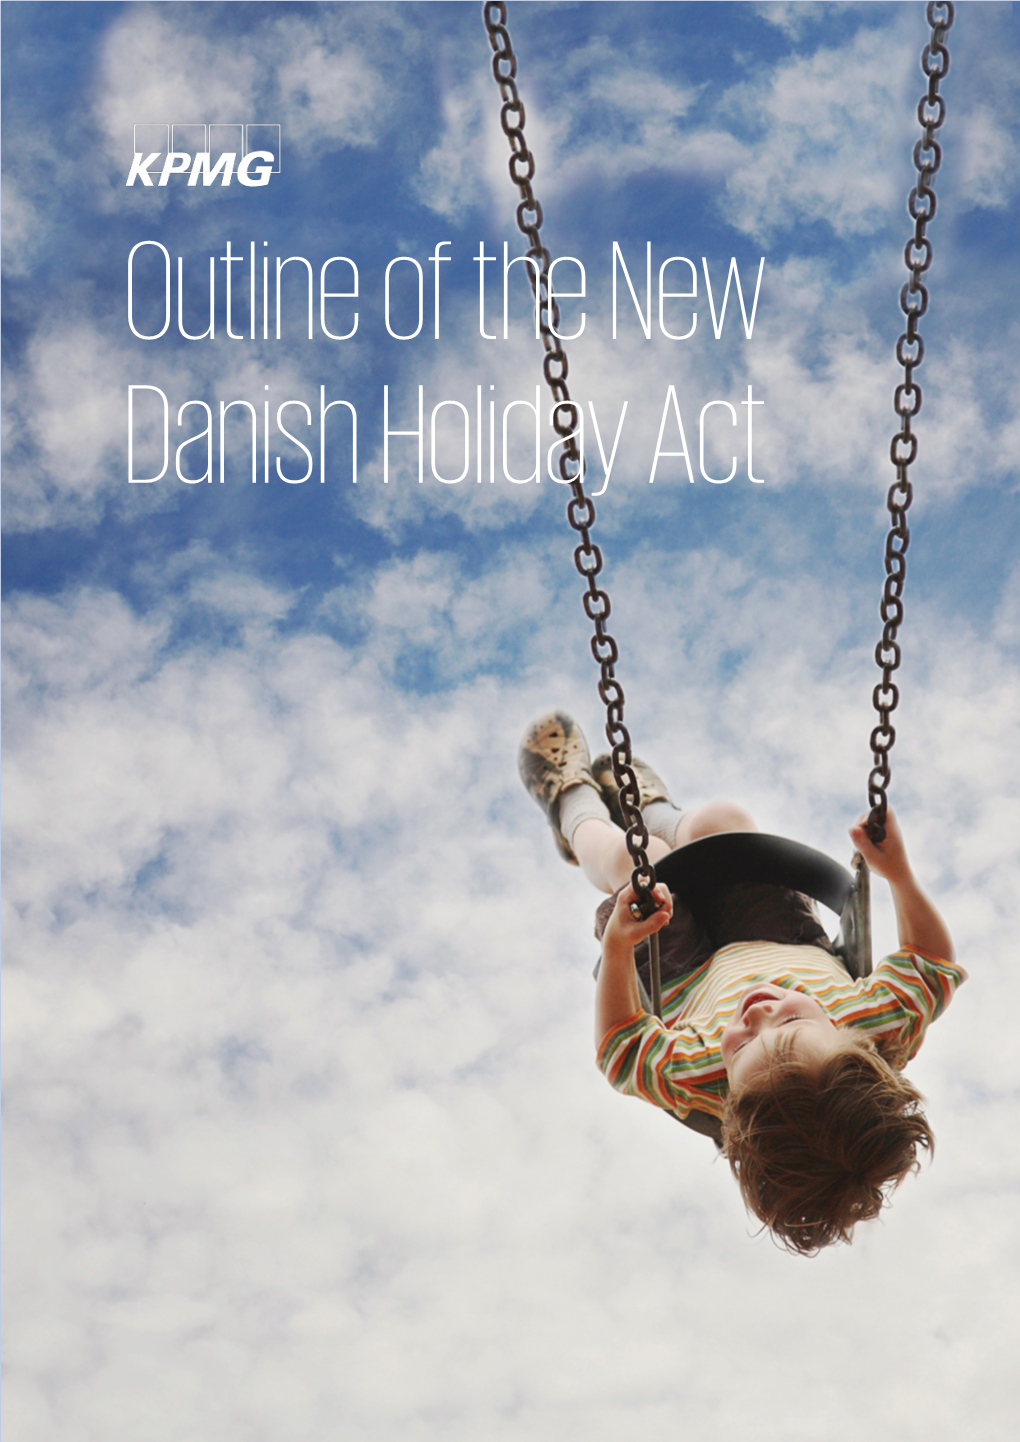 Outline of the New Danish Holiday Act